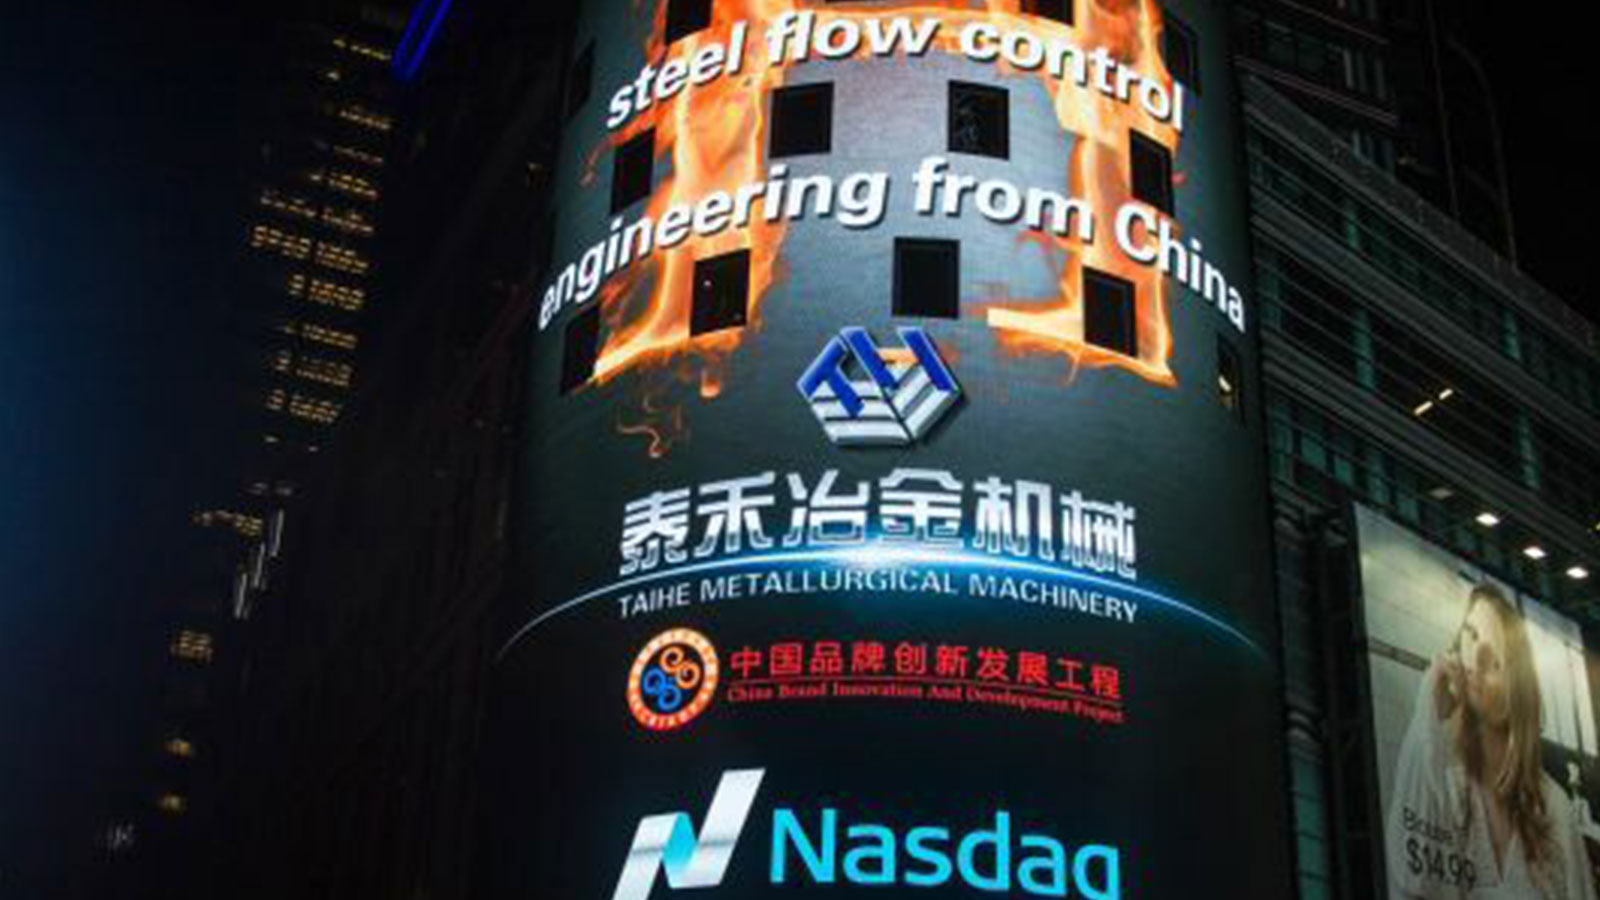 Taihe advertised in Times Square, New York, USA